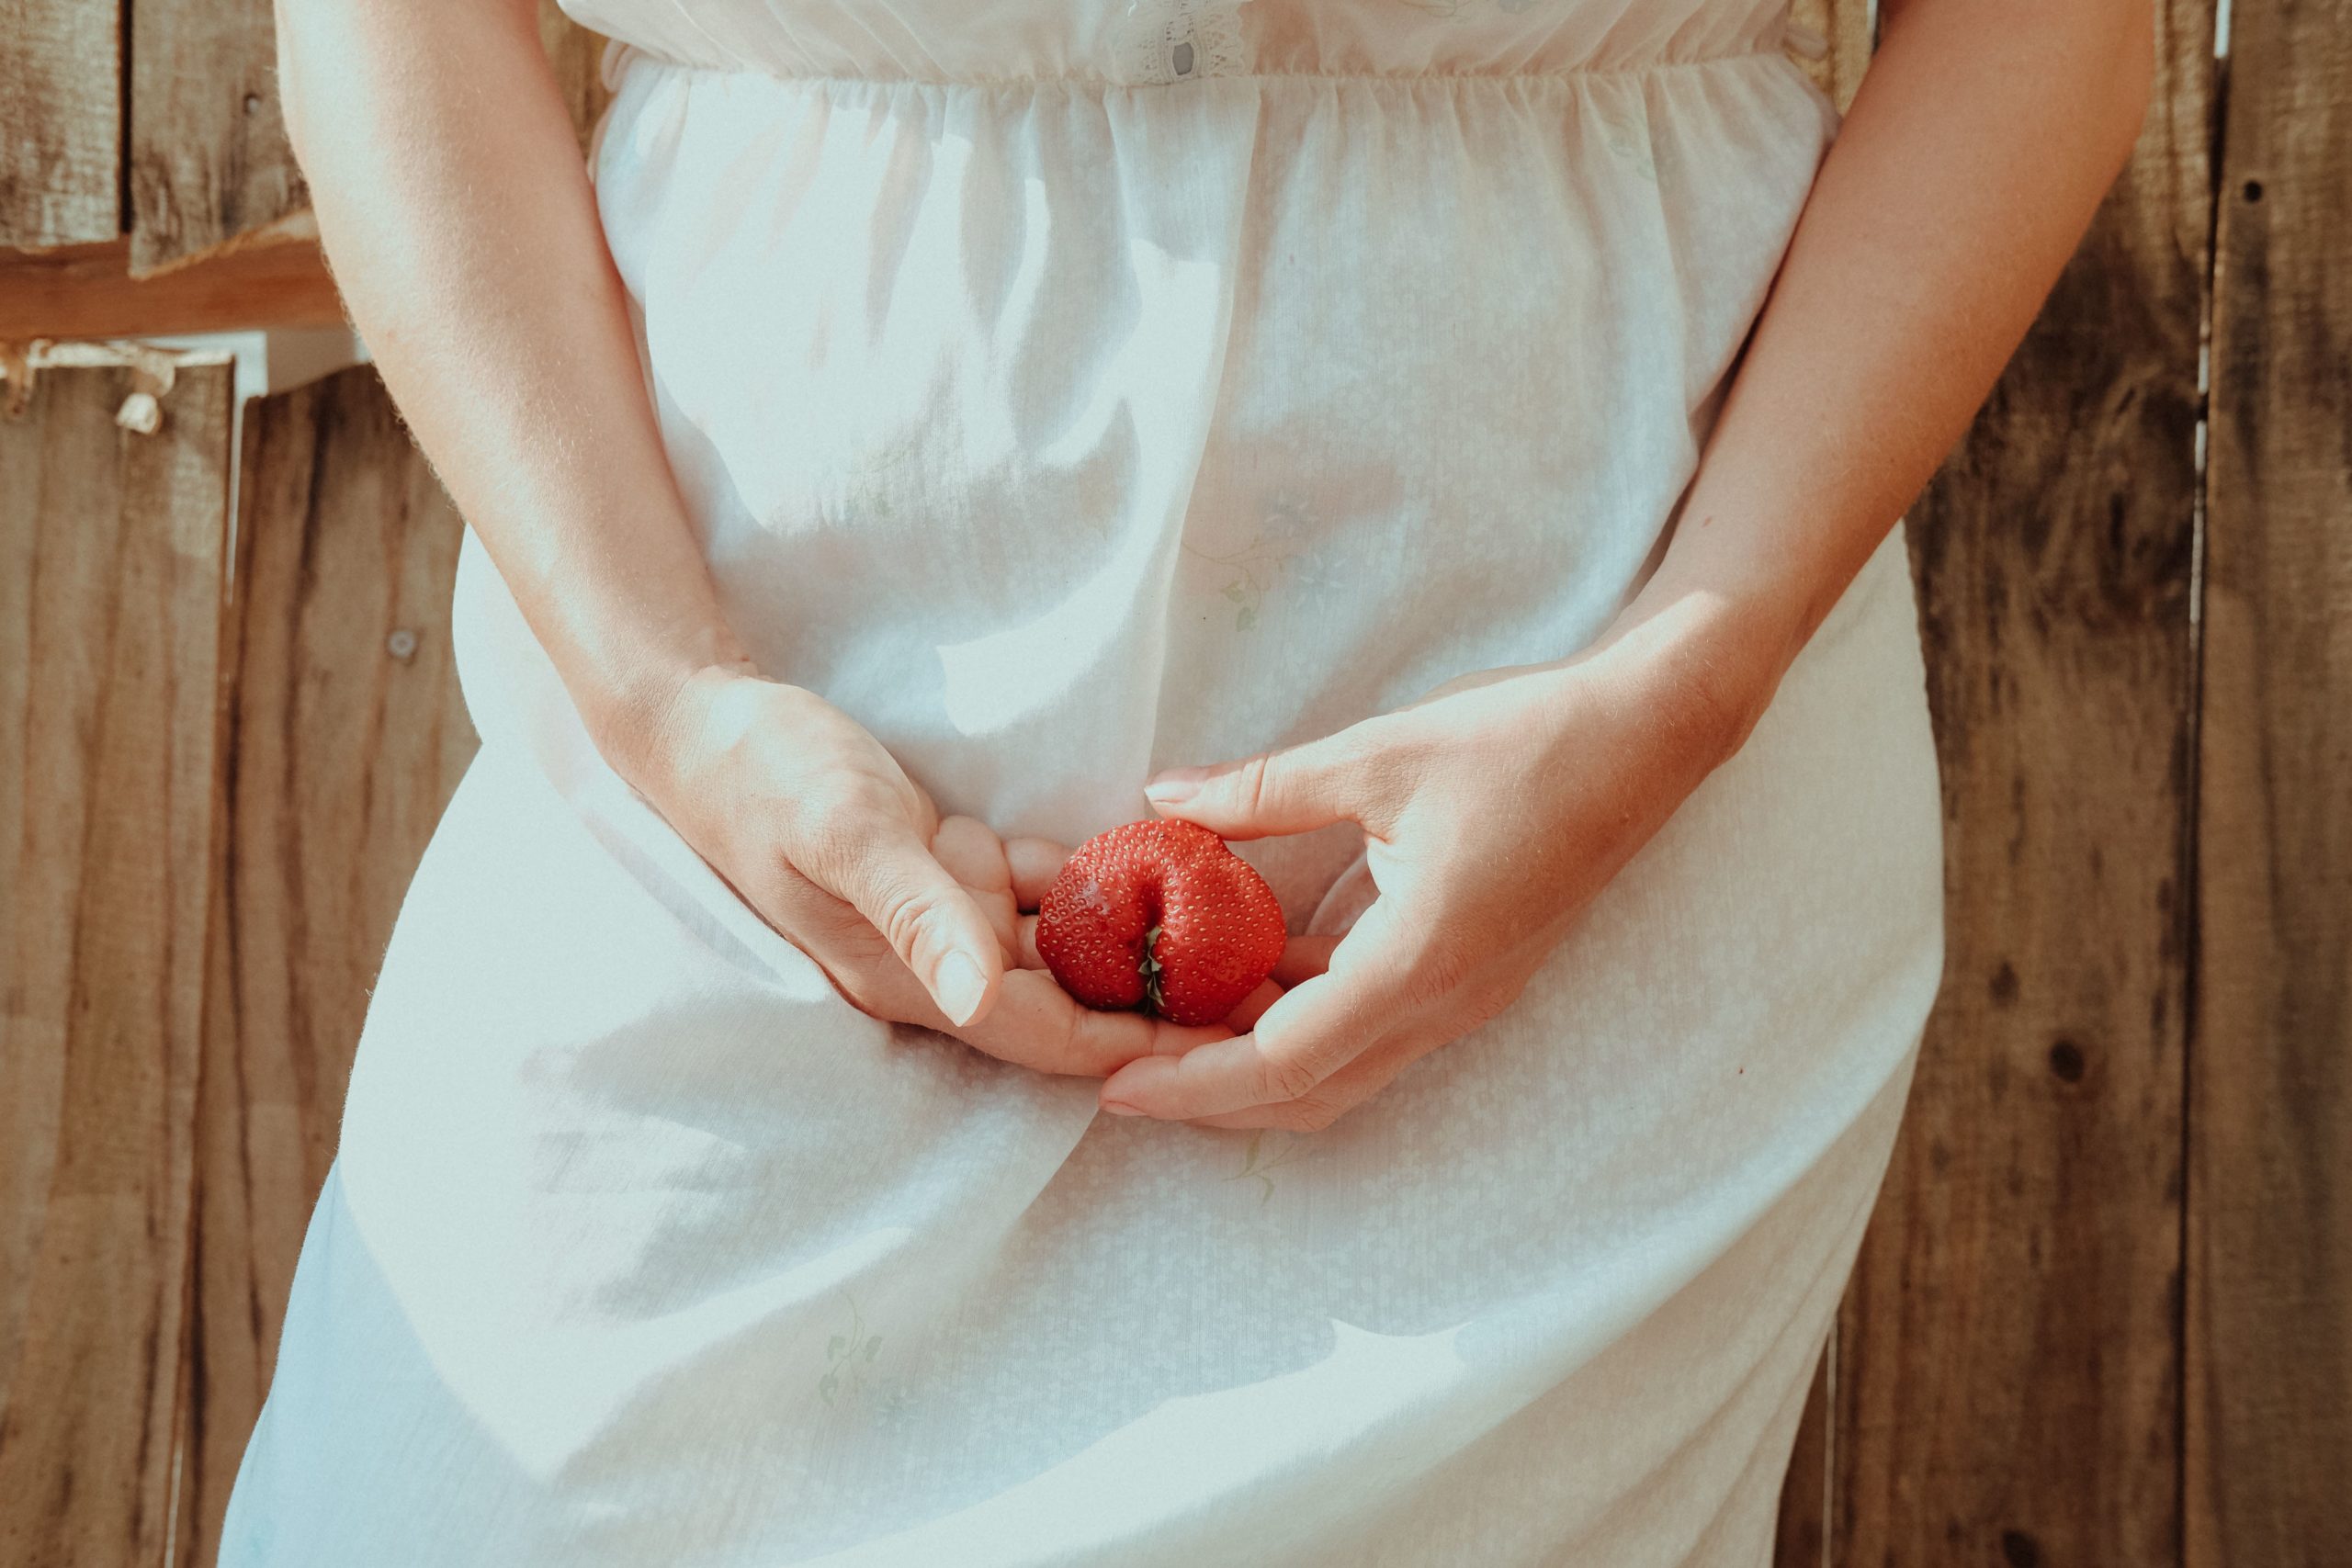 A standing woman in a white dress holds a strawberry in front of her groin.